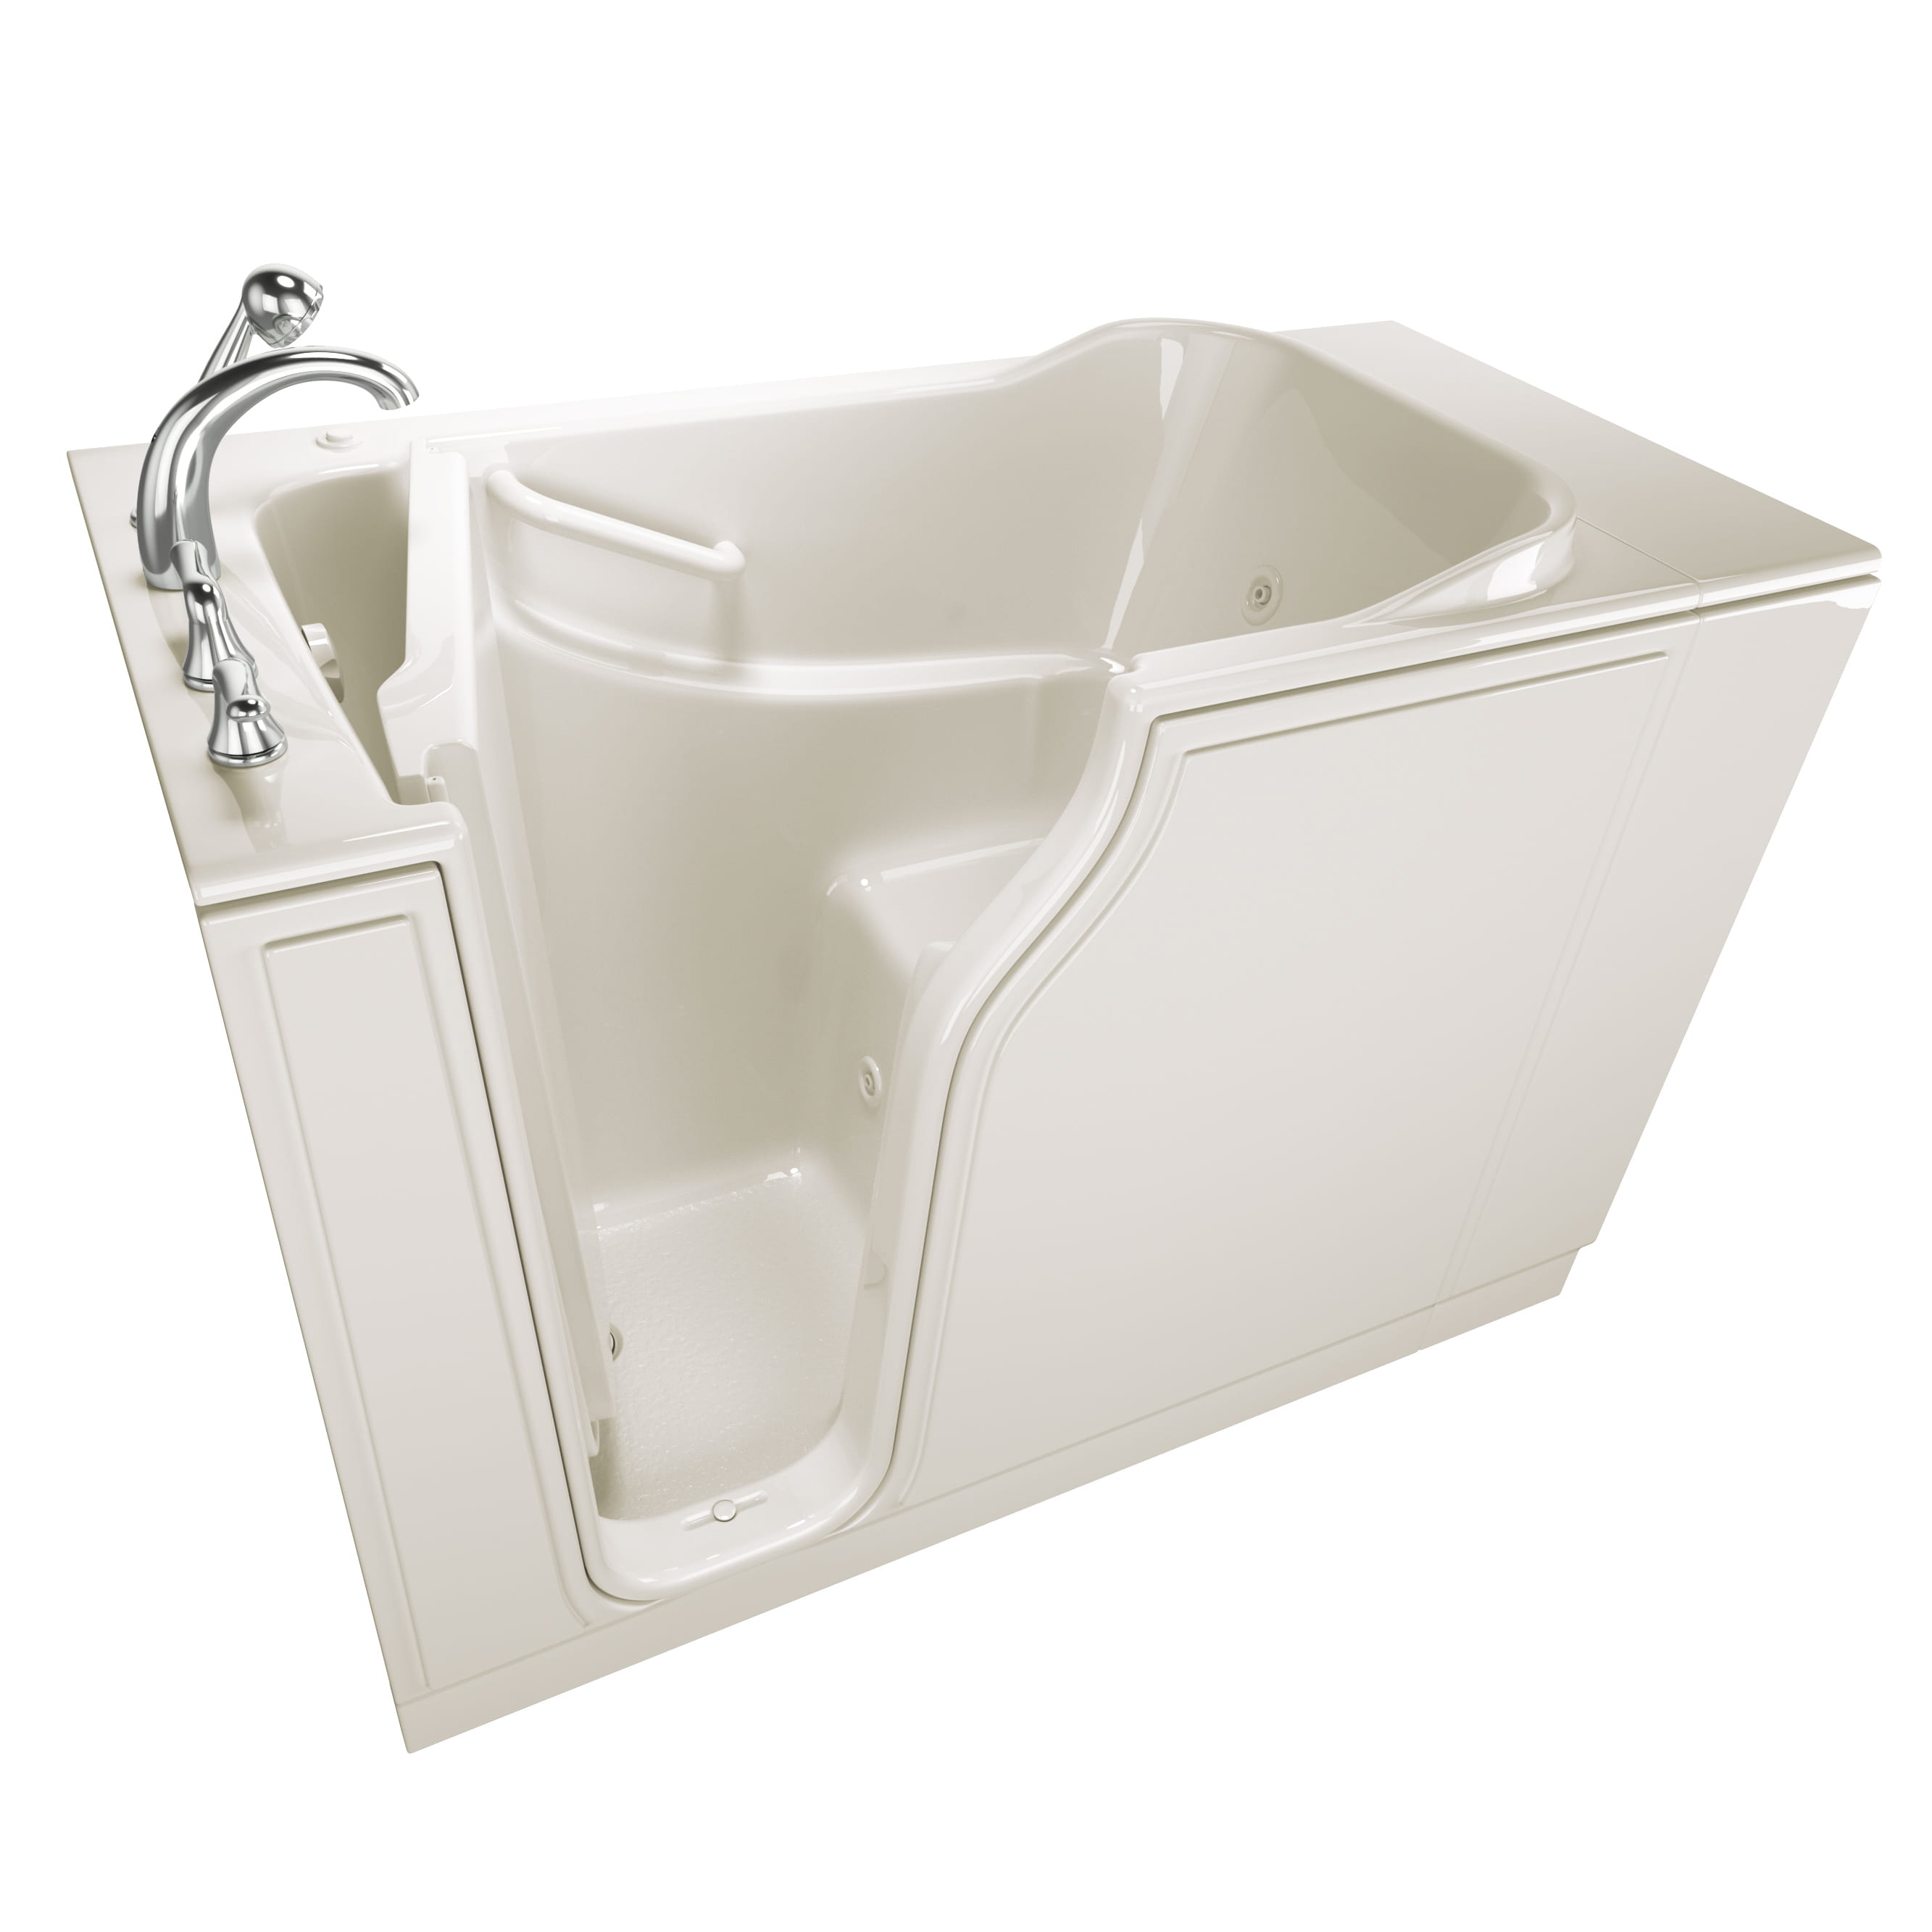 Gelcoat Entry Series 52 x 30-Inch Walk-In Tub With Whirlpool System – Left-Hand Drain With Faucet